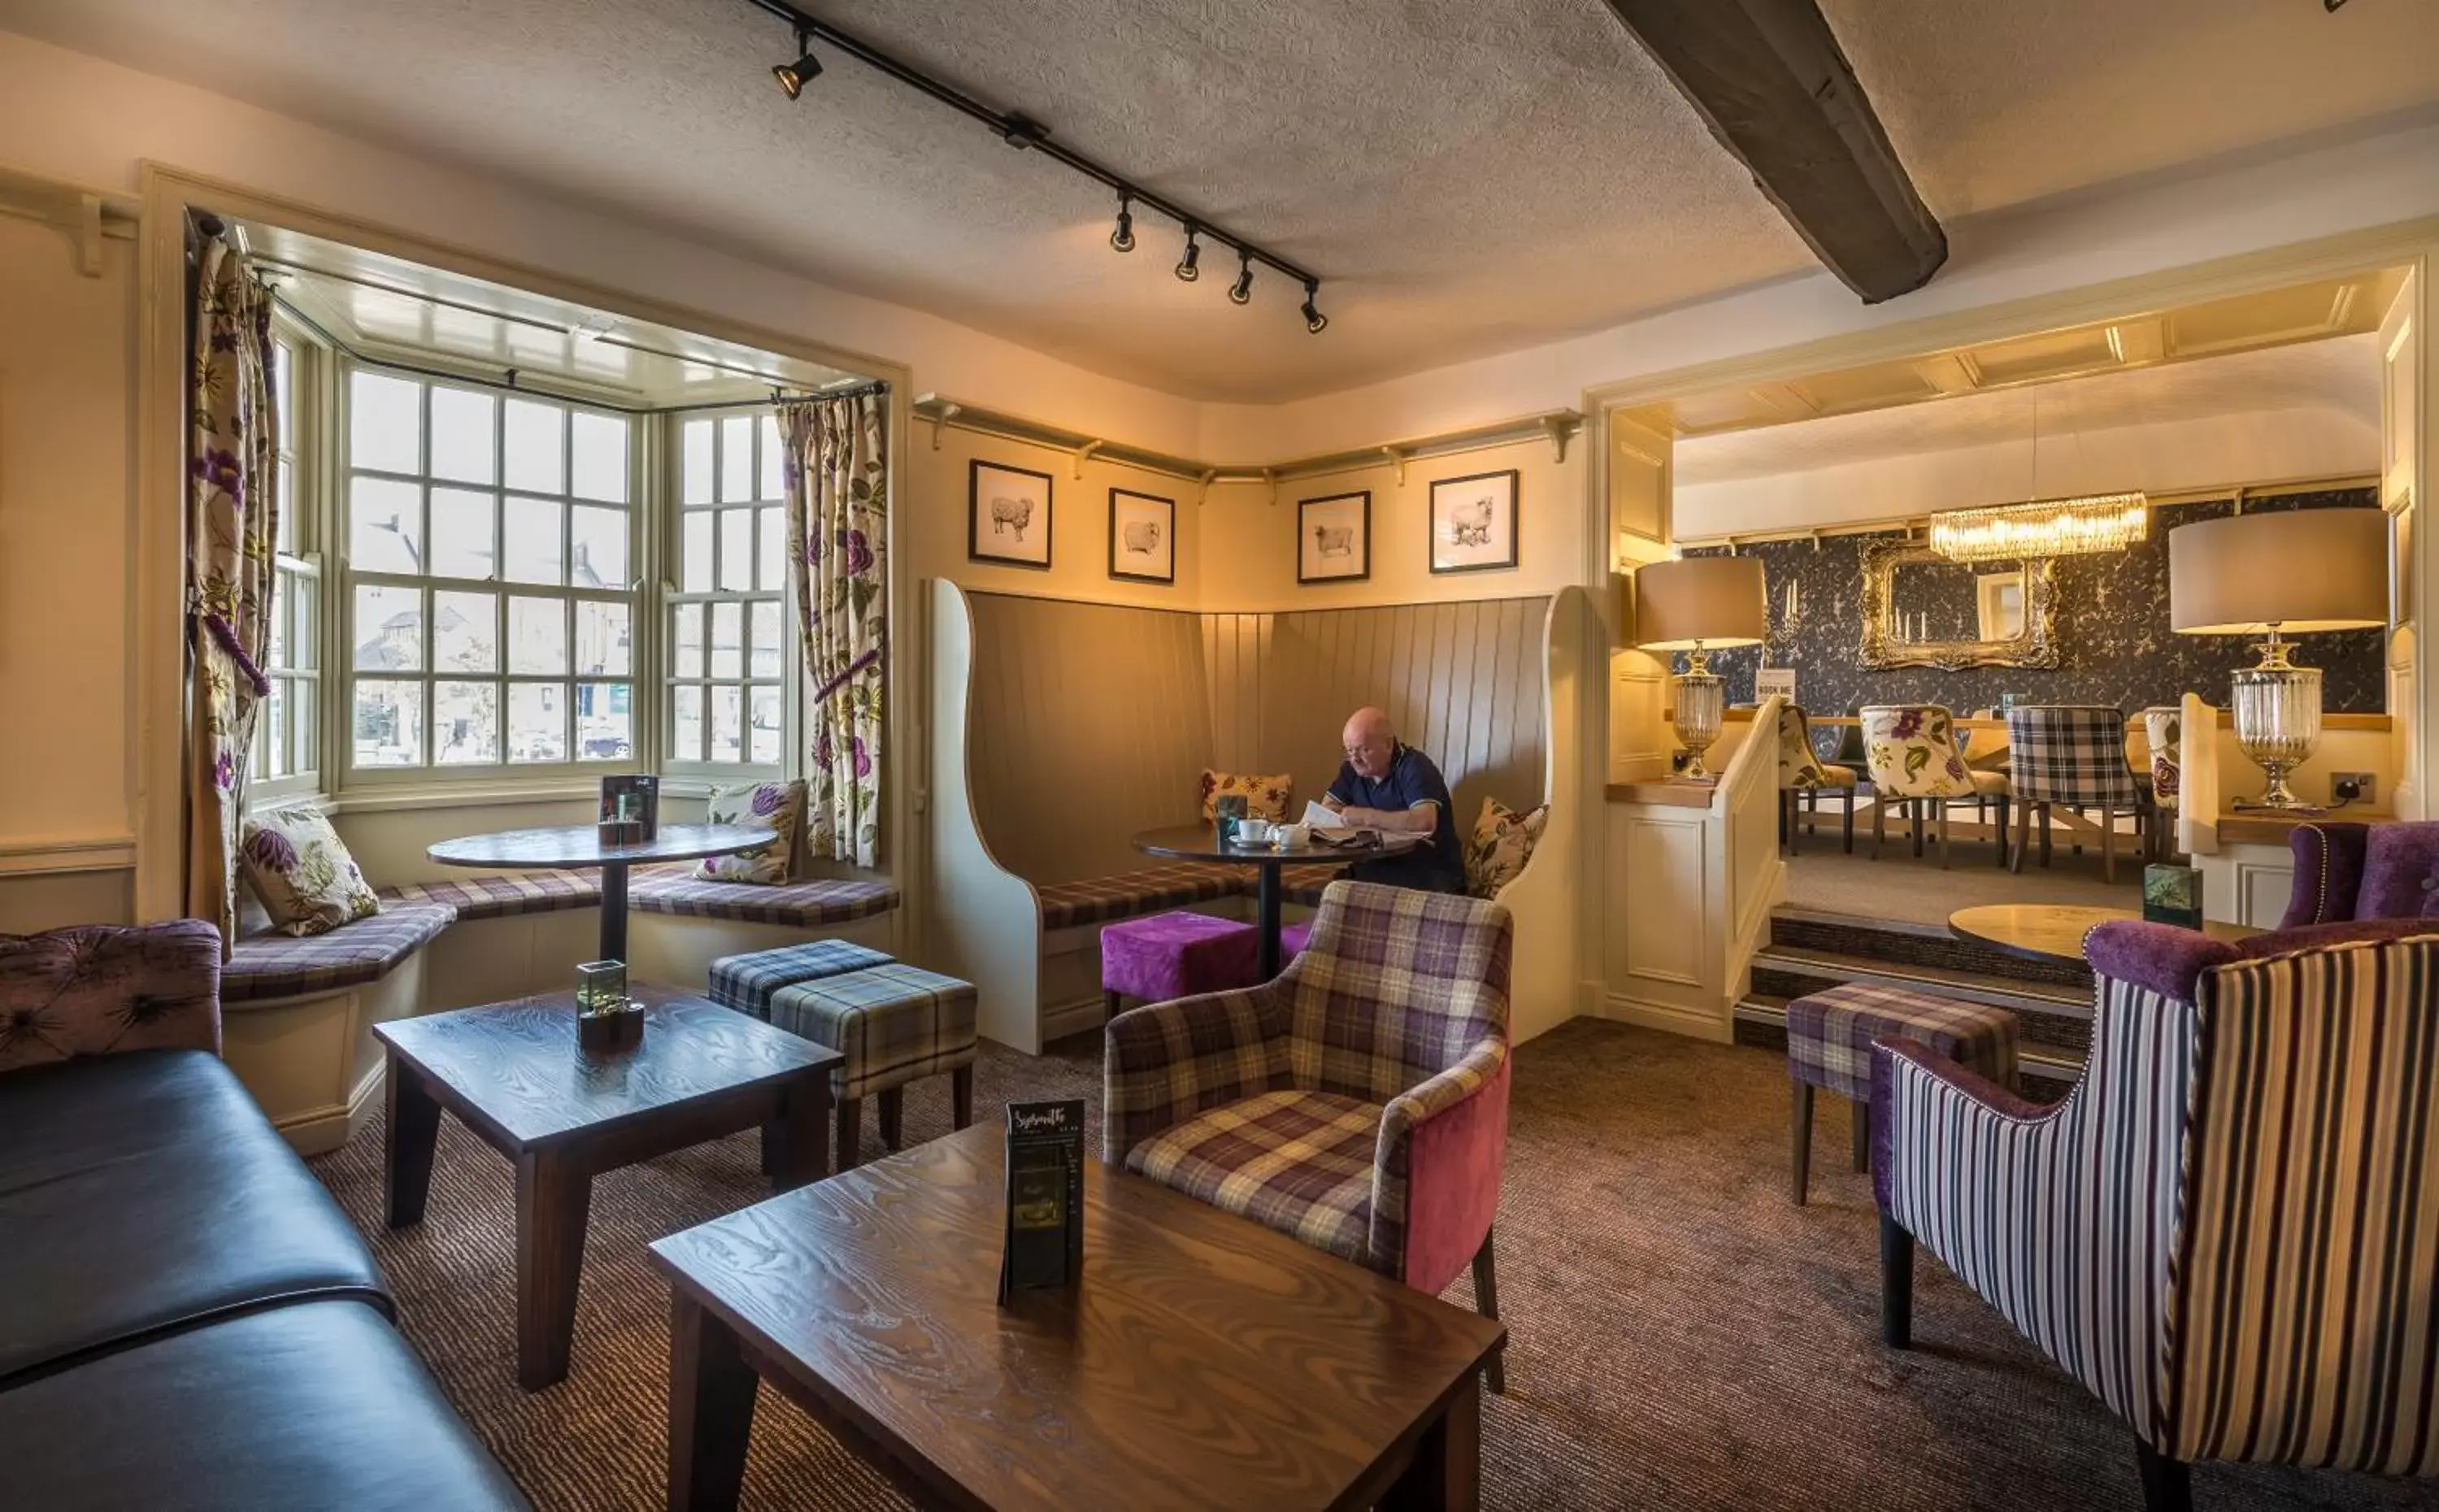 Seating area, Lounge/Bar in The Golden Fleece Hotel, Thirsk, North Yorkshire